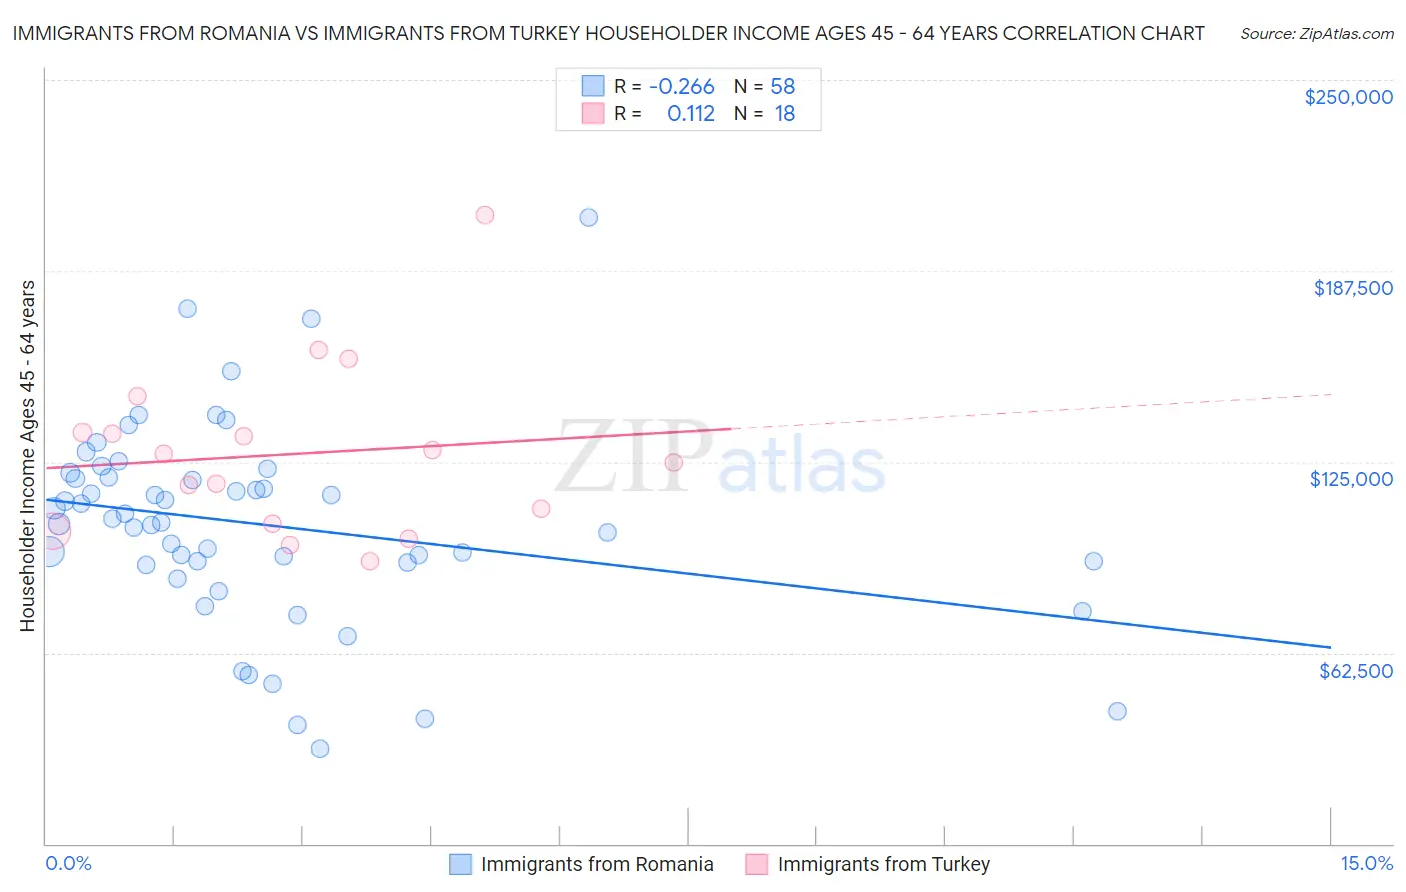 Immigrants from Romania vs Immigrants from Turkey Householder Income Ages 45 - 64 years